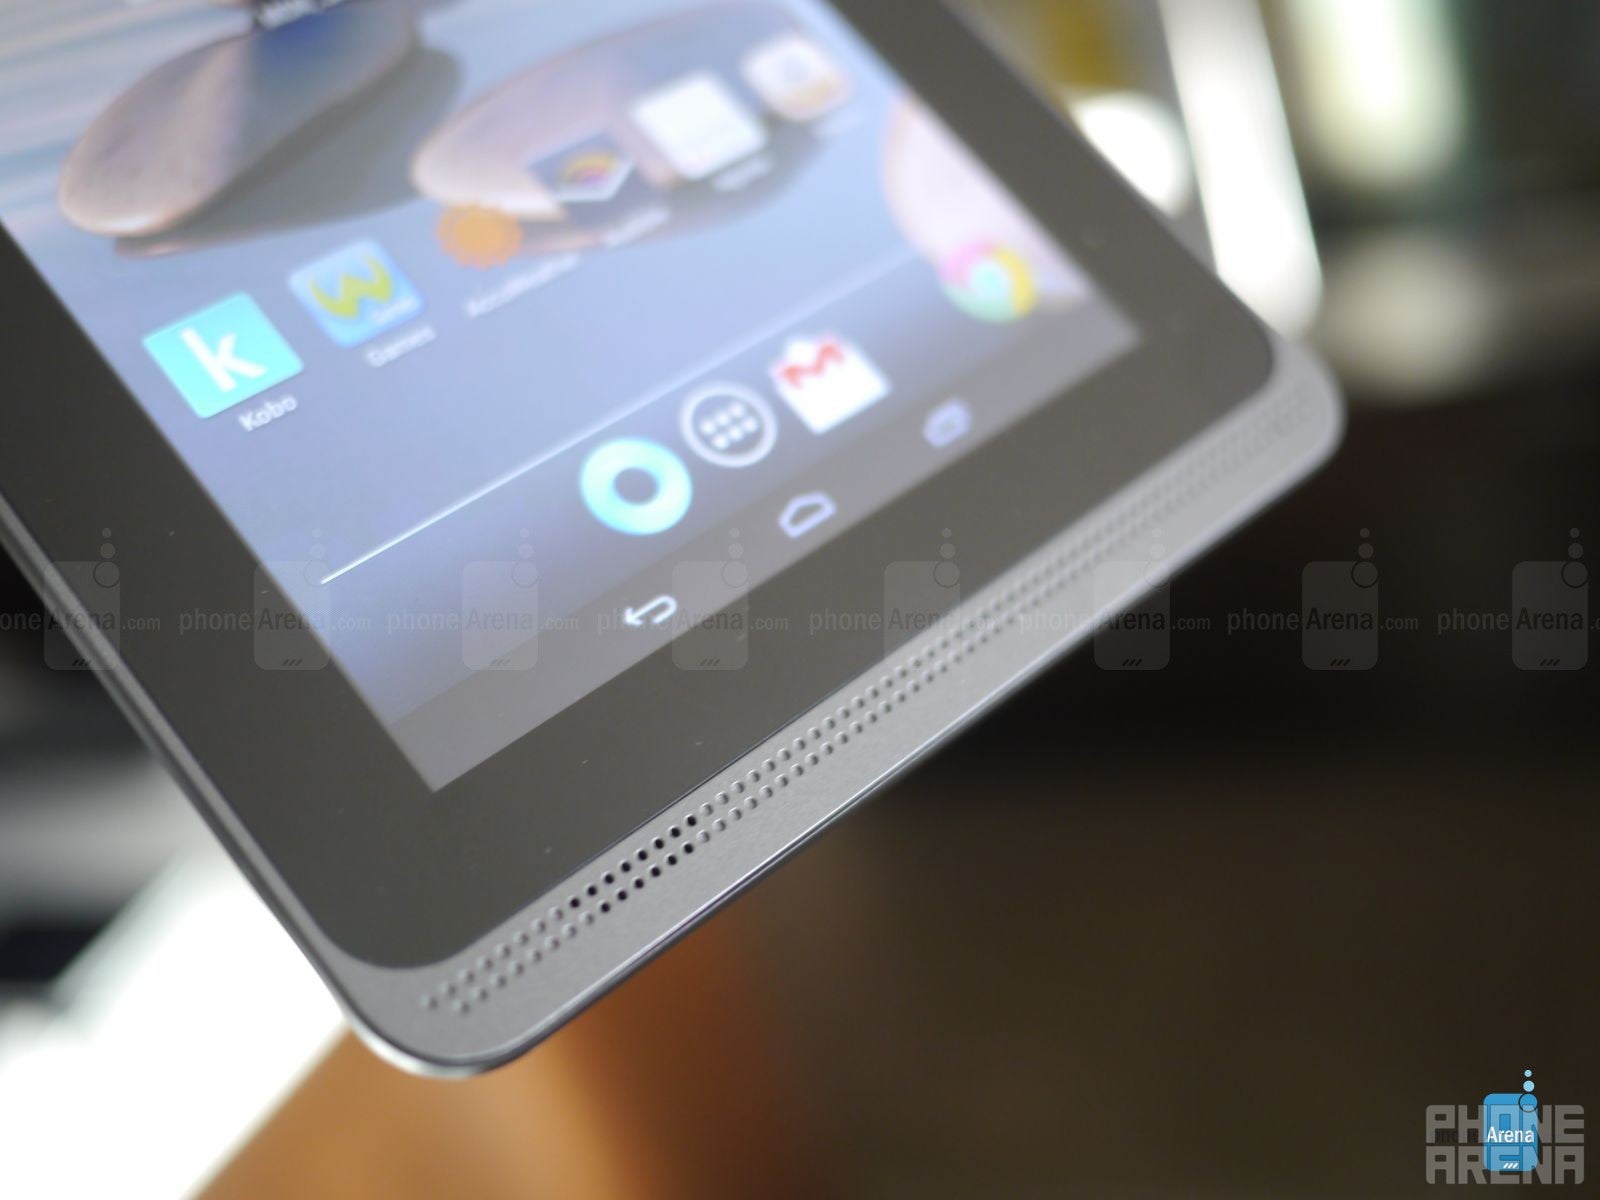 Front-facing speaker - Acer Iconia B1-720 hands-on